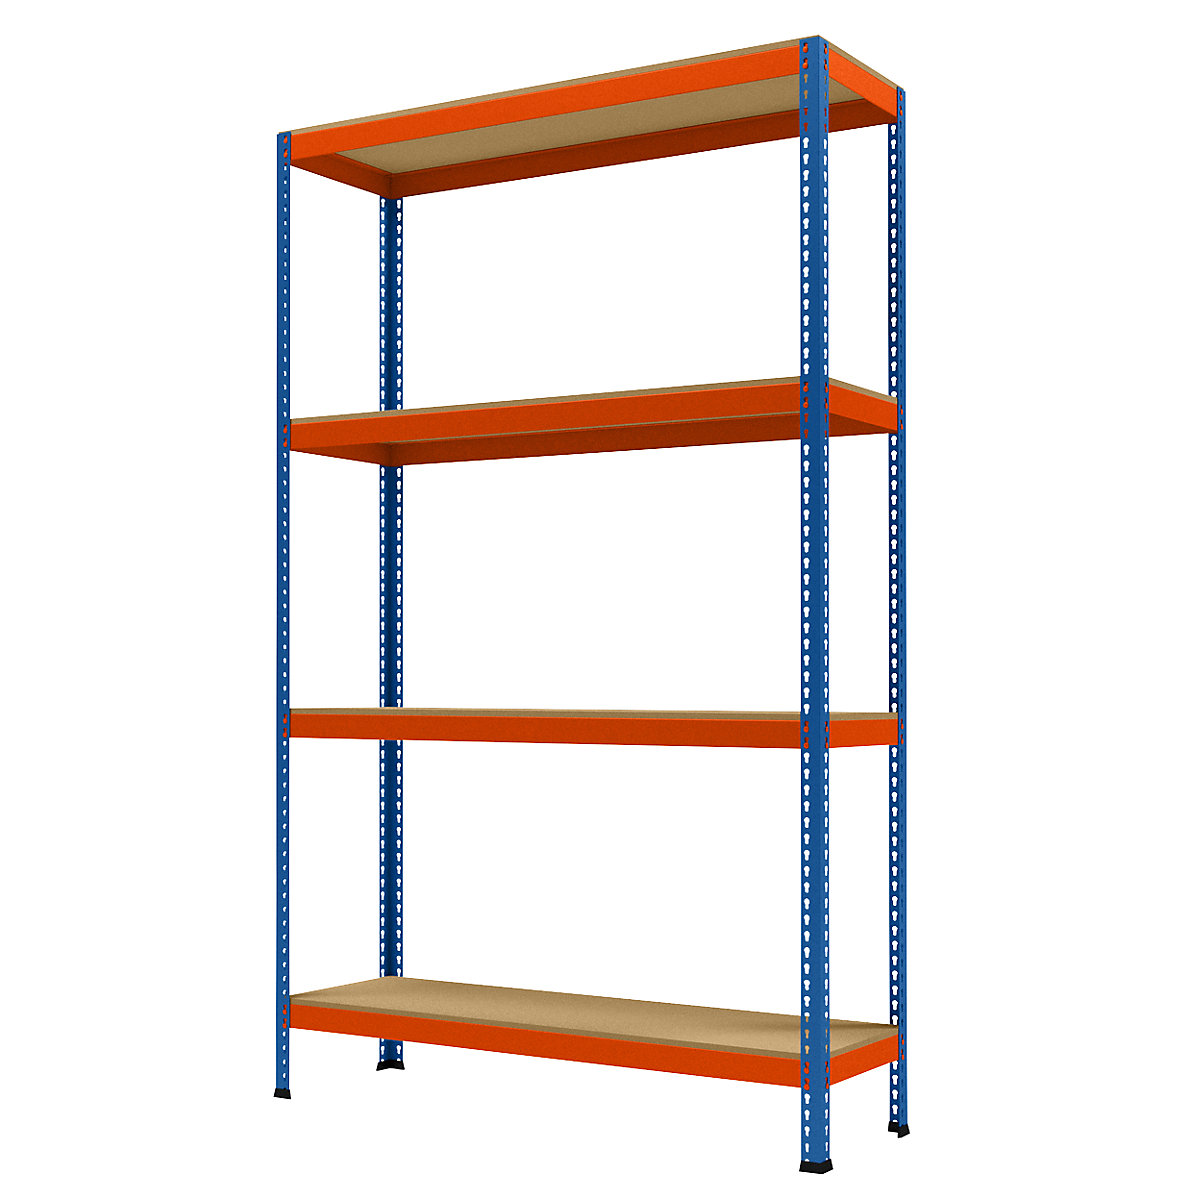 Wide span heavy duty shelving, height 2438 mm, overall depth 468 mm, width 1536 mm